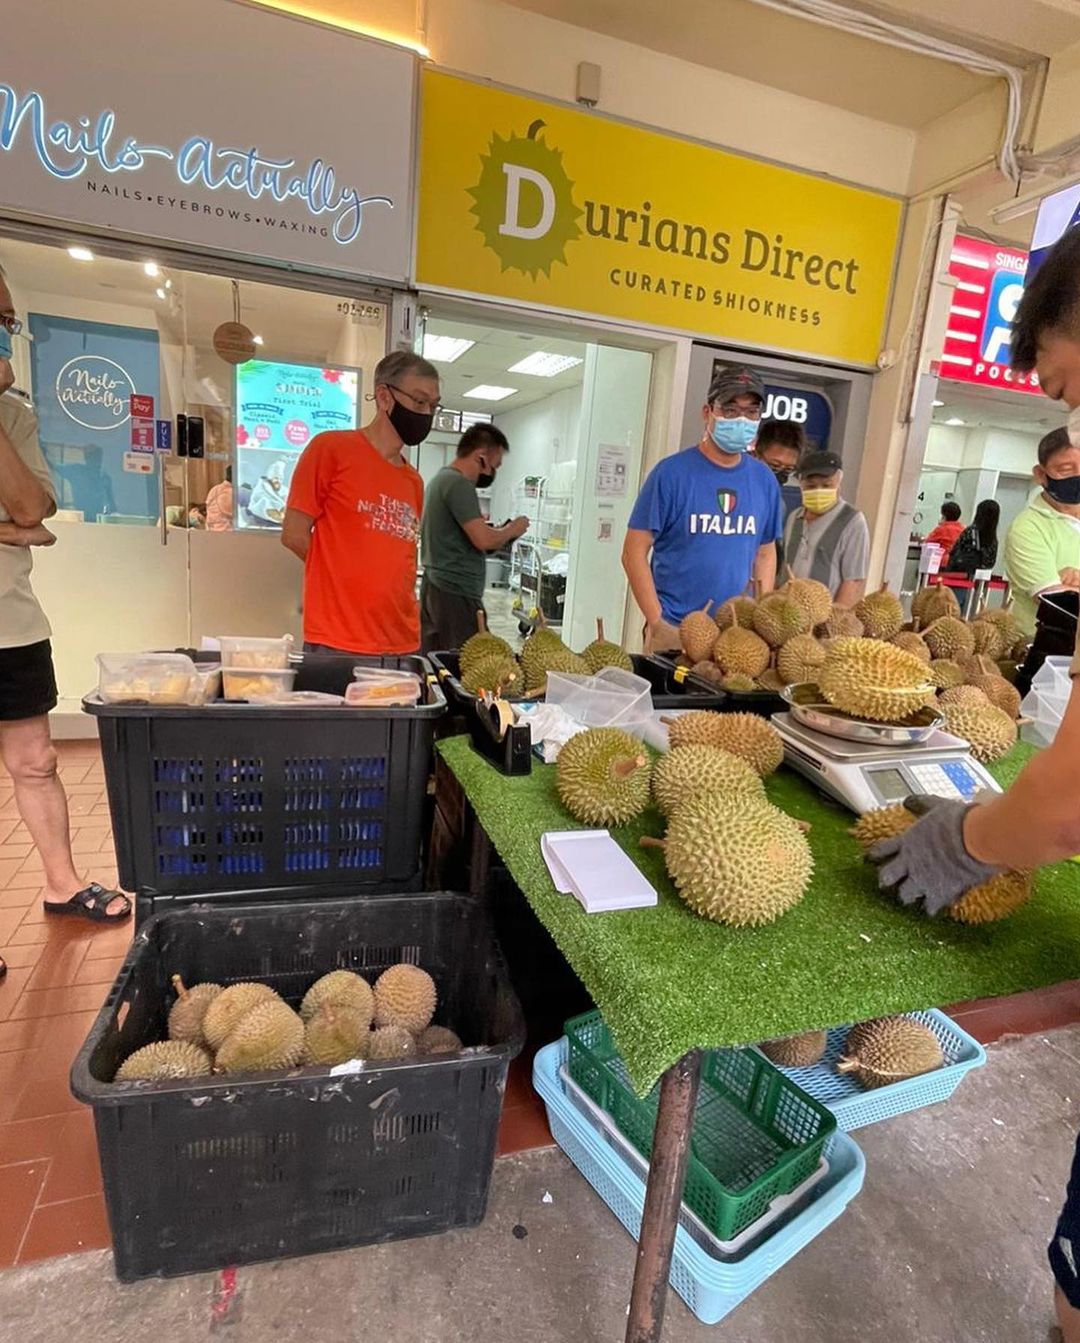 durians-direct-stall-storefront